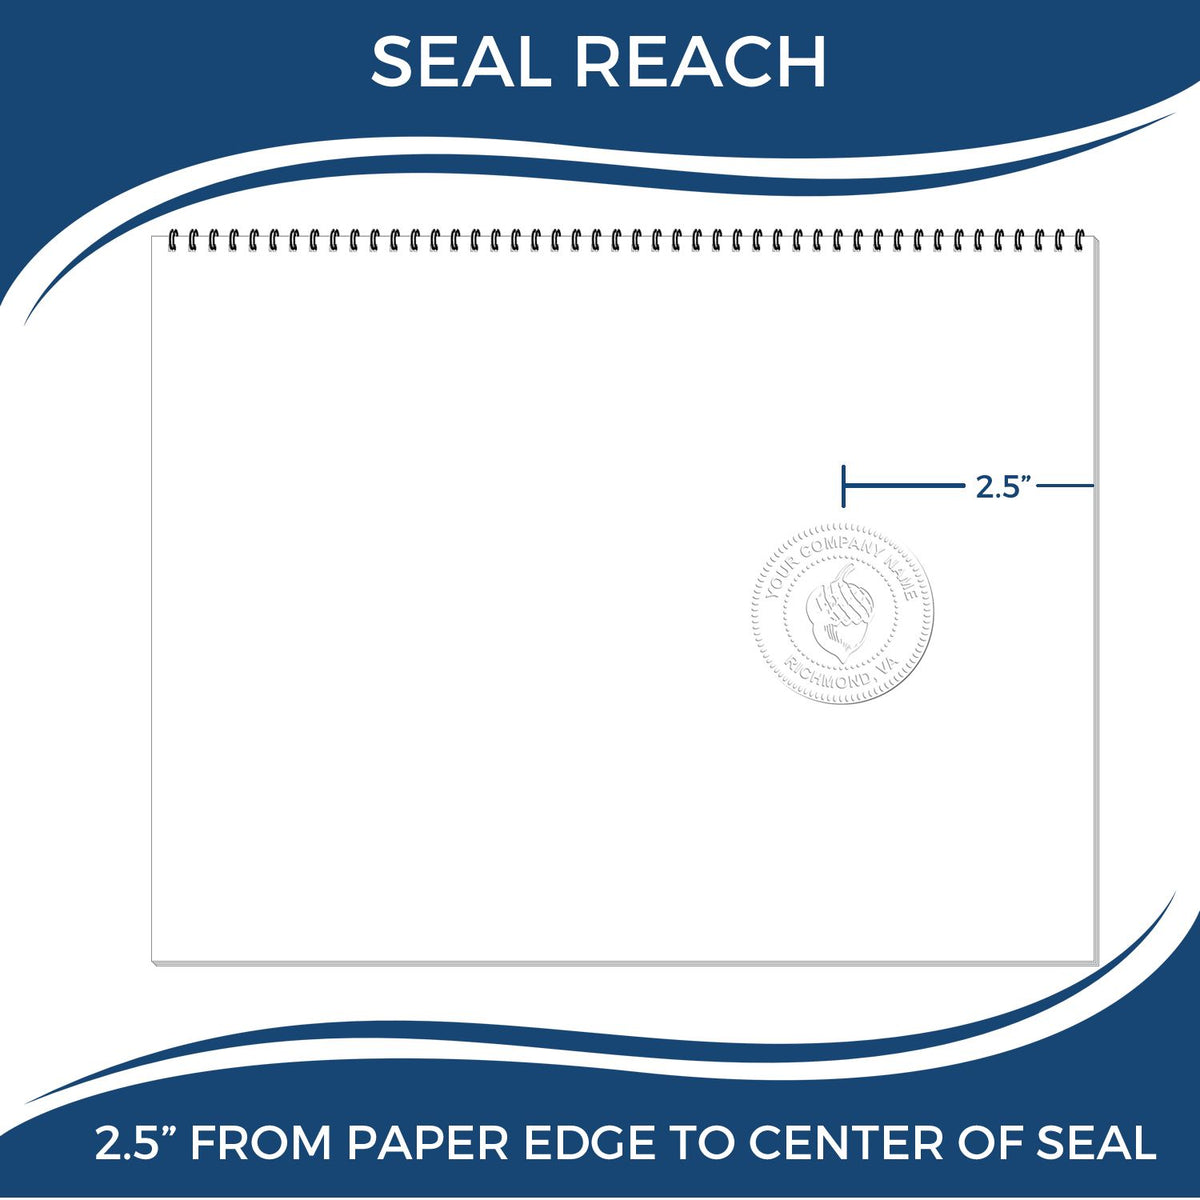 An infographic showing the seal reach which is represented by a ruler and a miniature seal image of the Long Reach North Carolina PE Seal